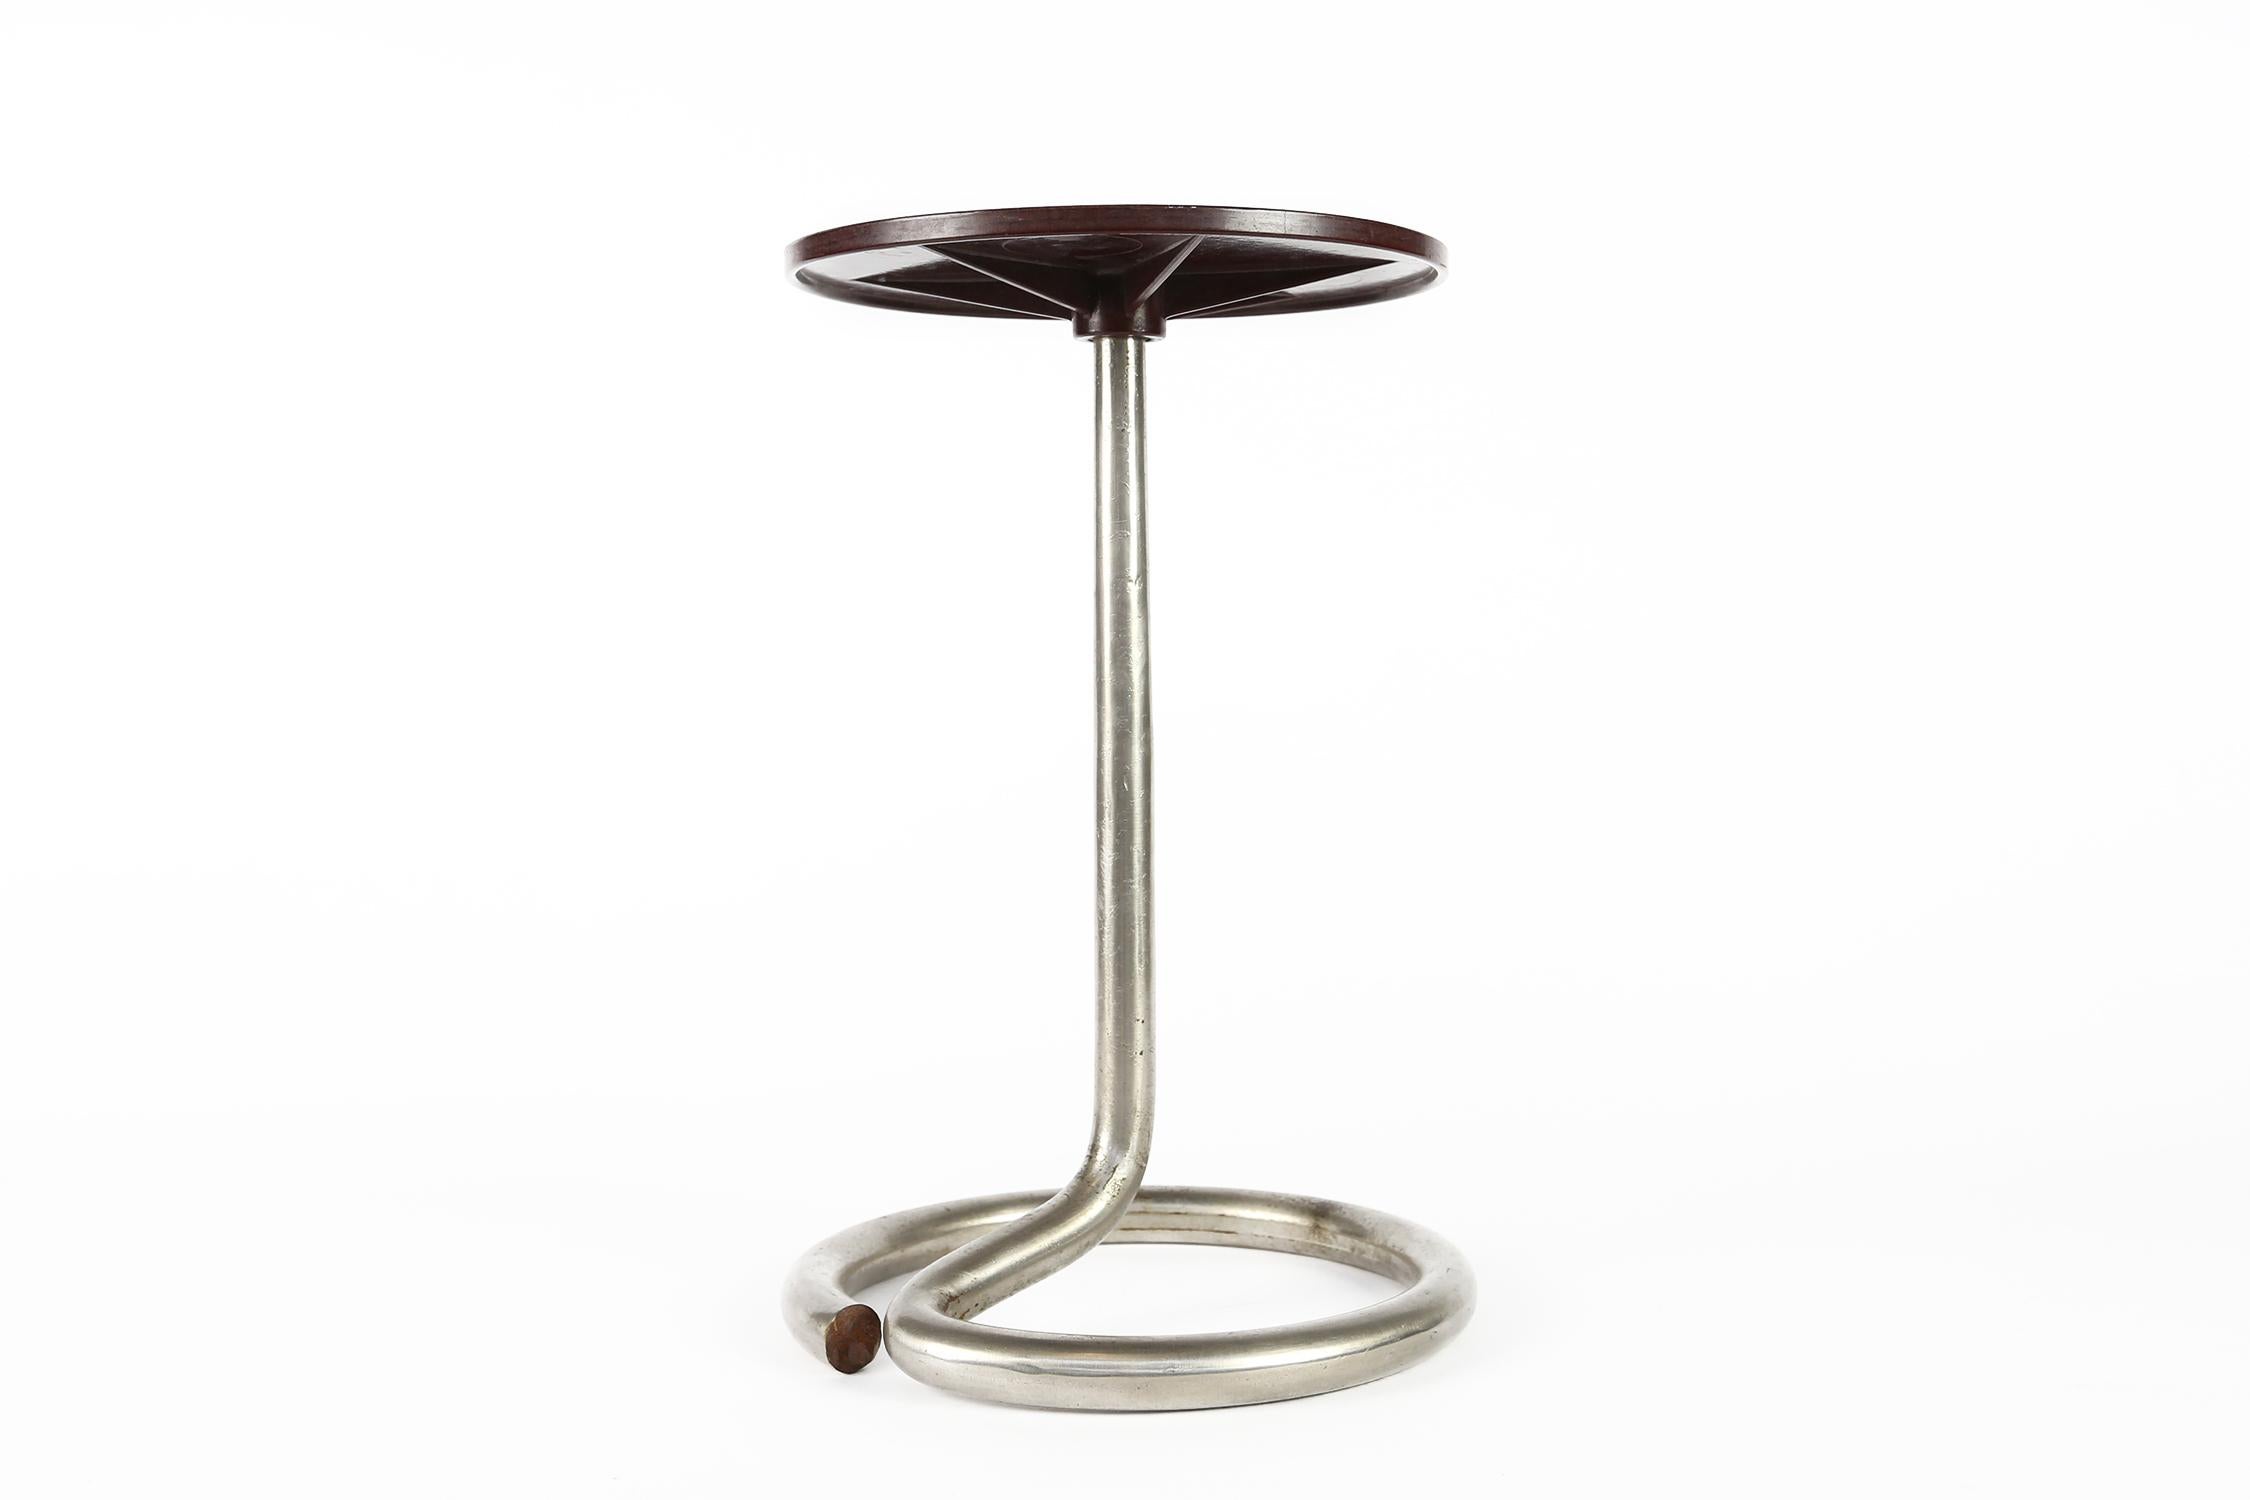 Bauhaus Modernist Side Table by René Herbst for Stablet, France, 1930s